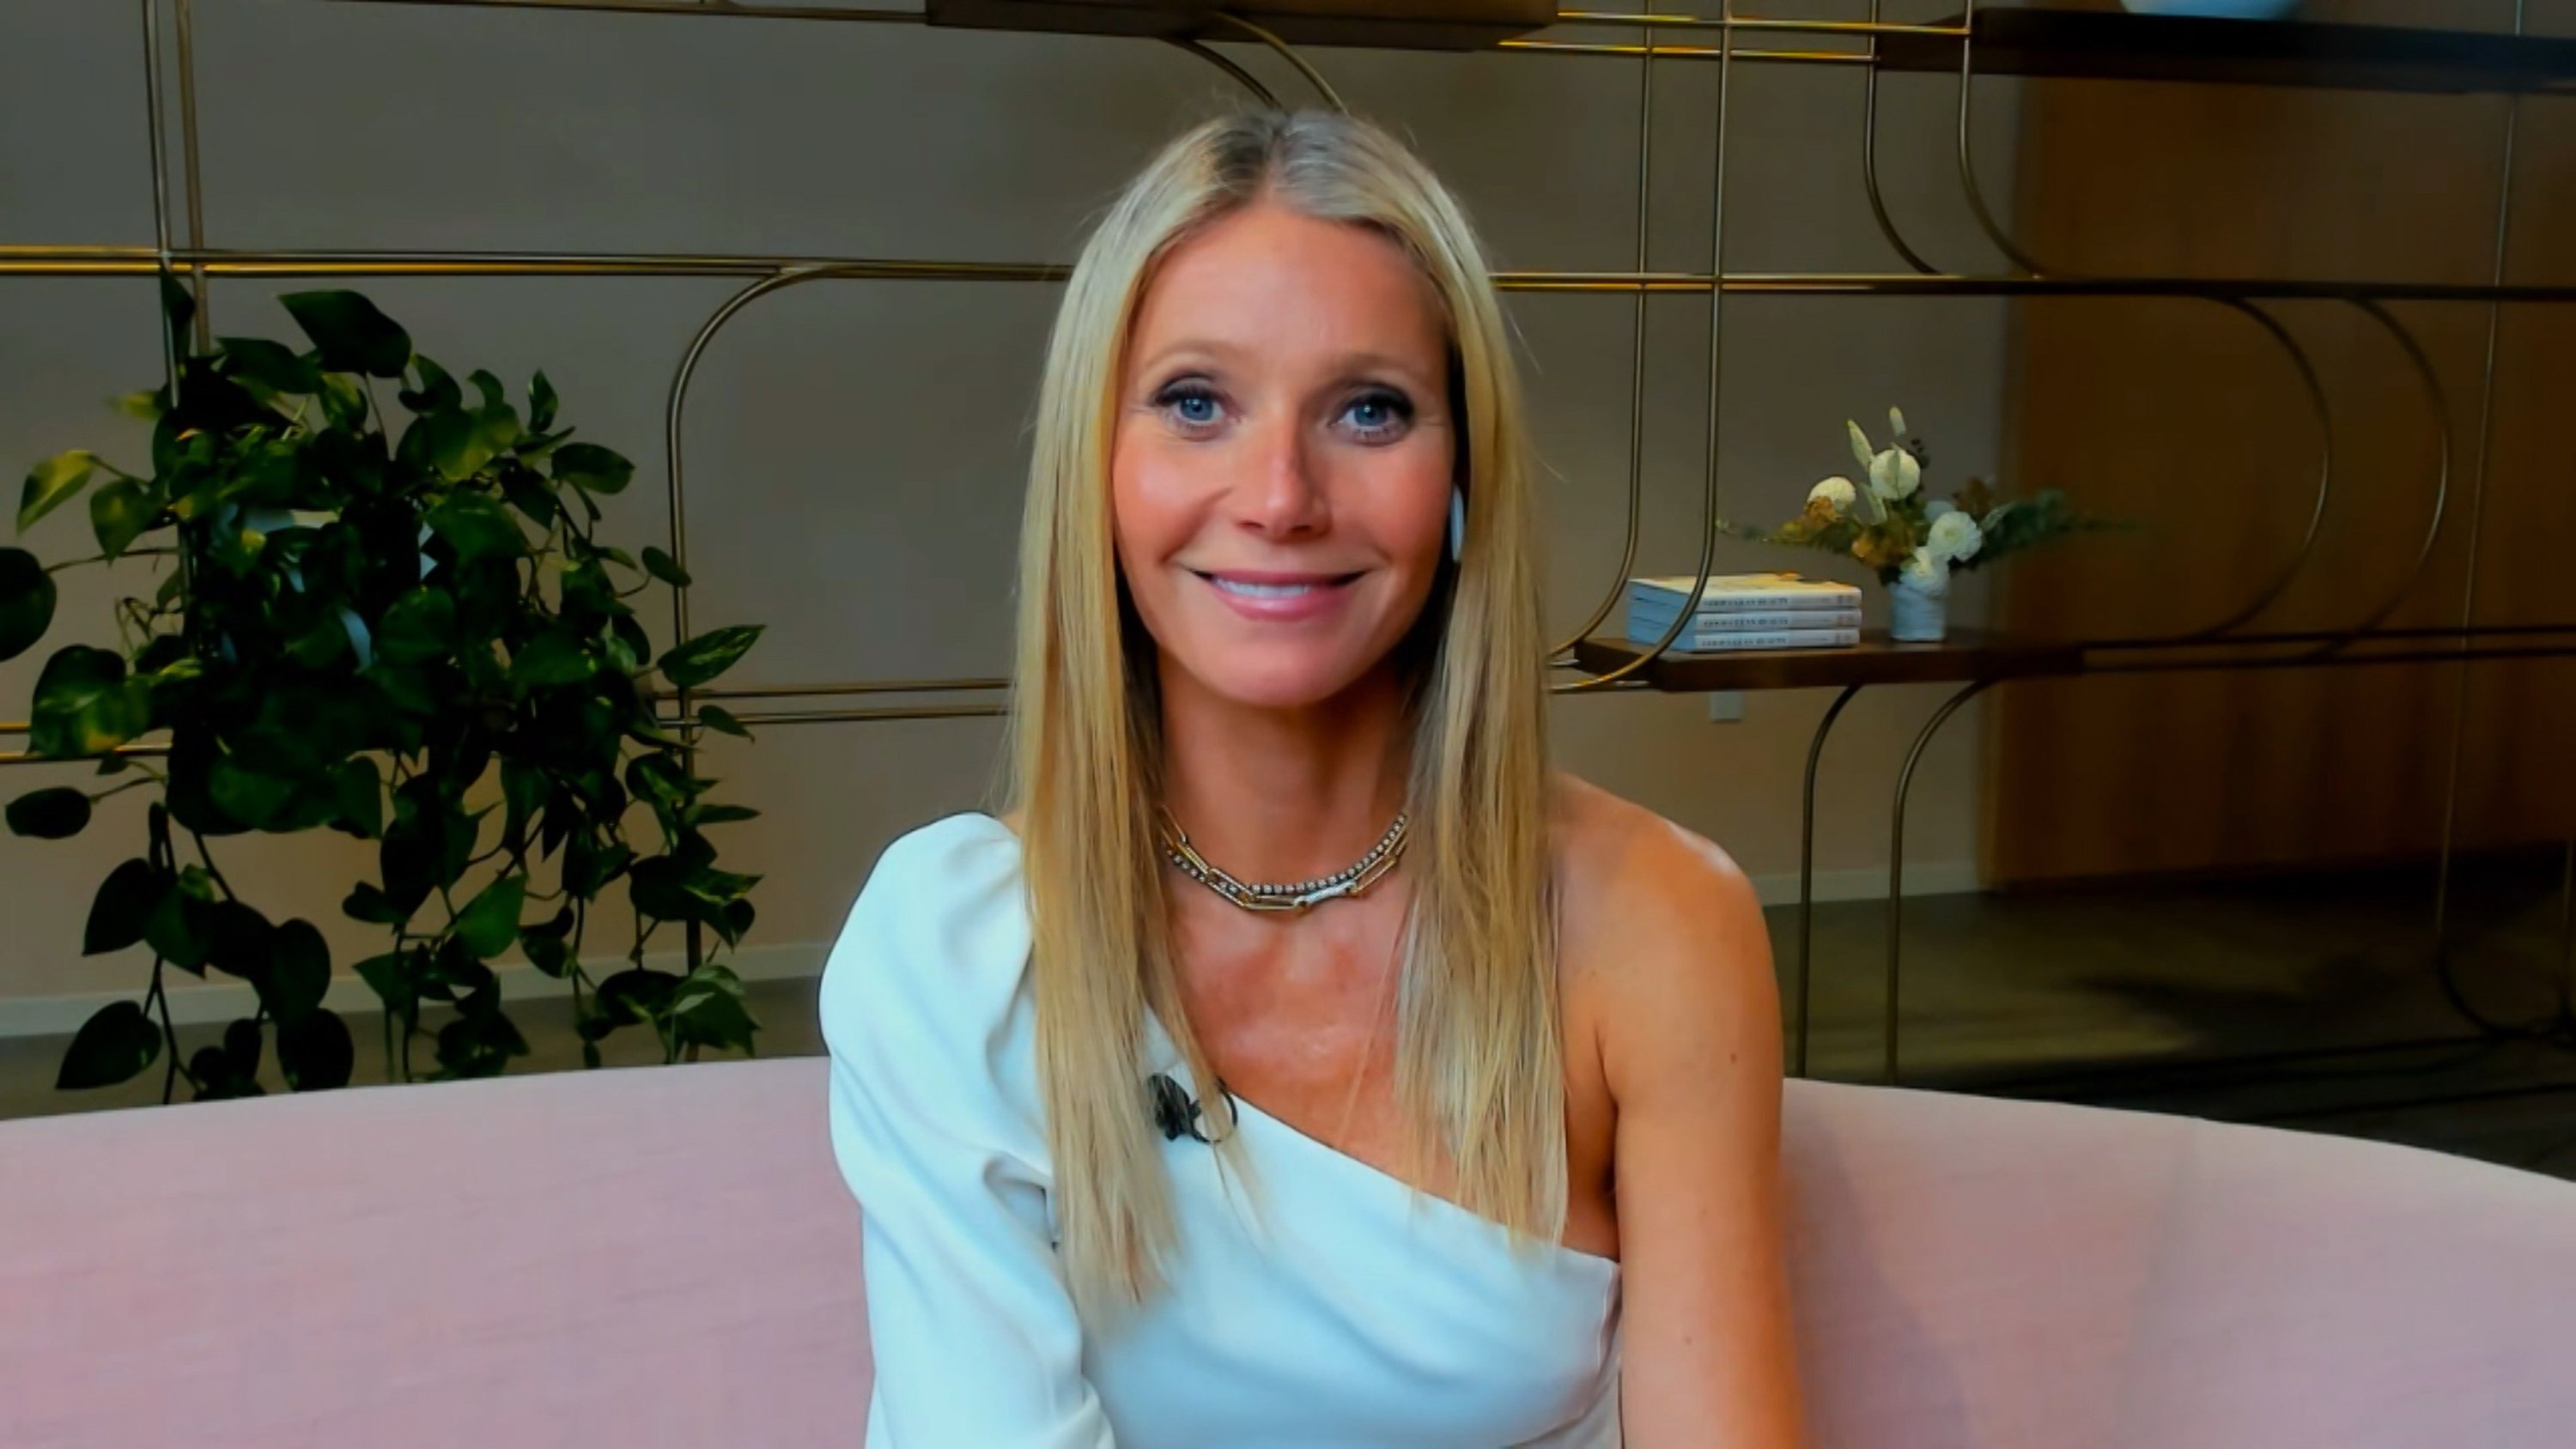 Screengrab of Gwyneth Paltrow as a guest on 'Watch What Happens Live with Andy Cohen'